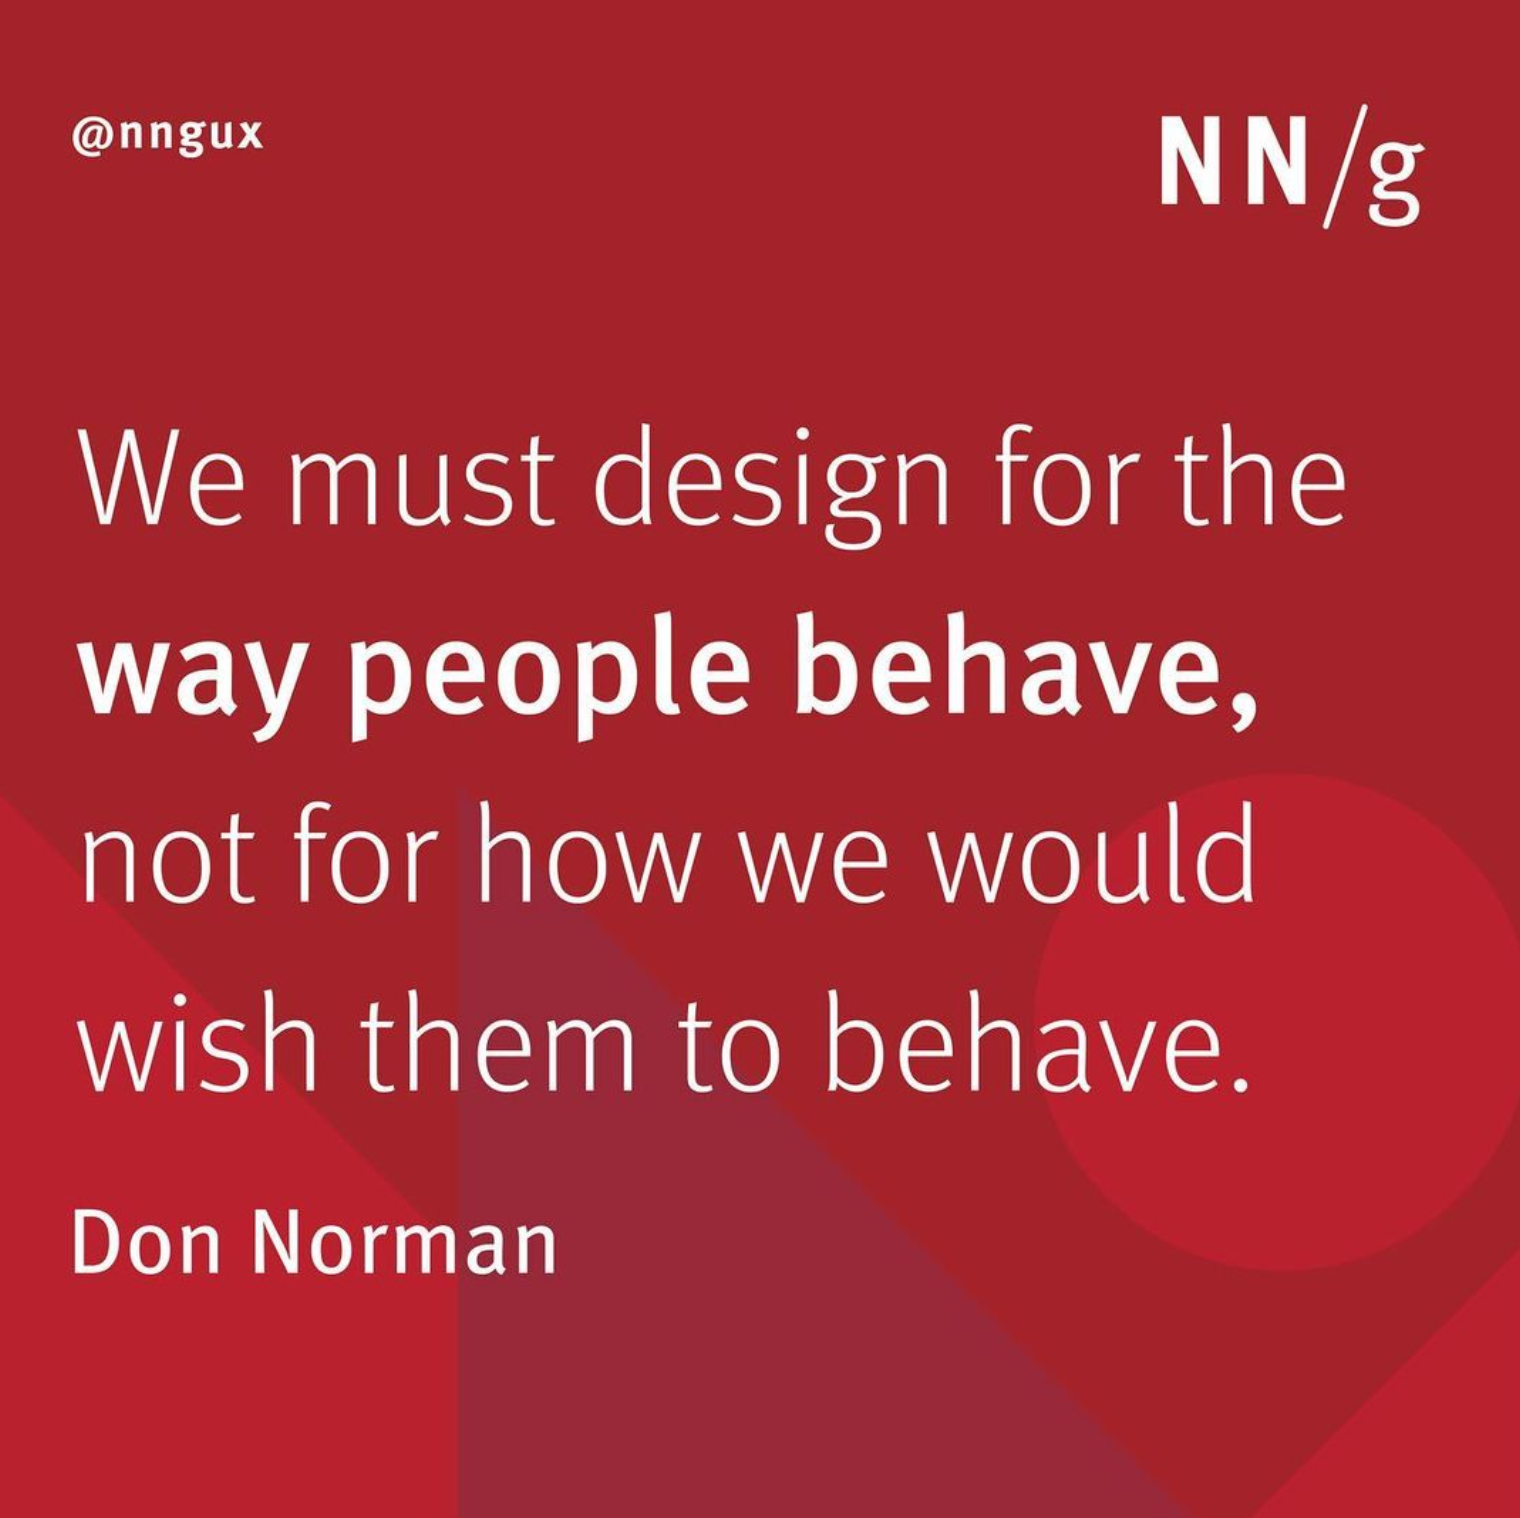 We must design for the way people behave, not for how we would wish them to behave. Don Norman